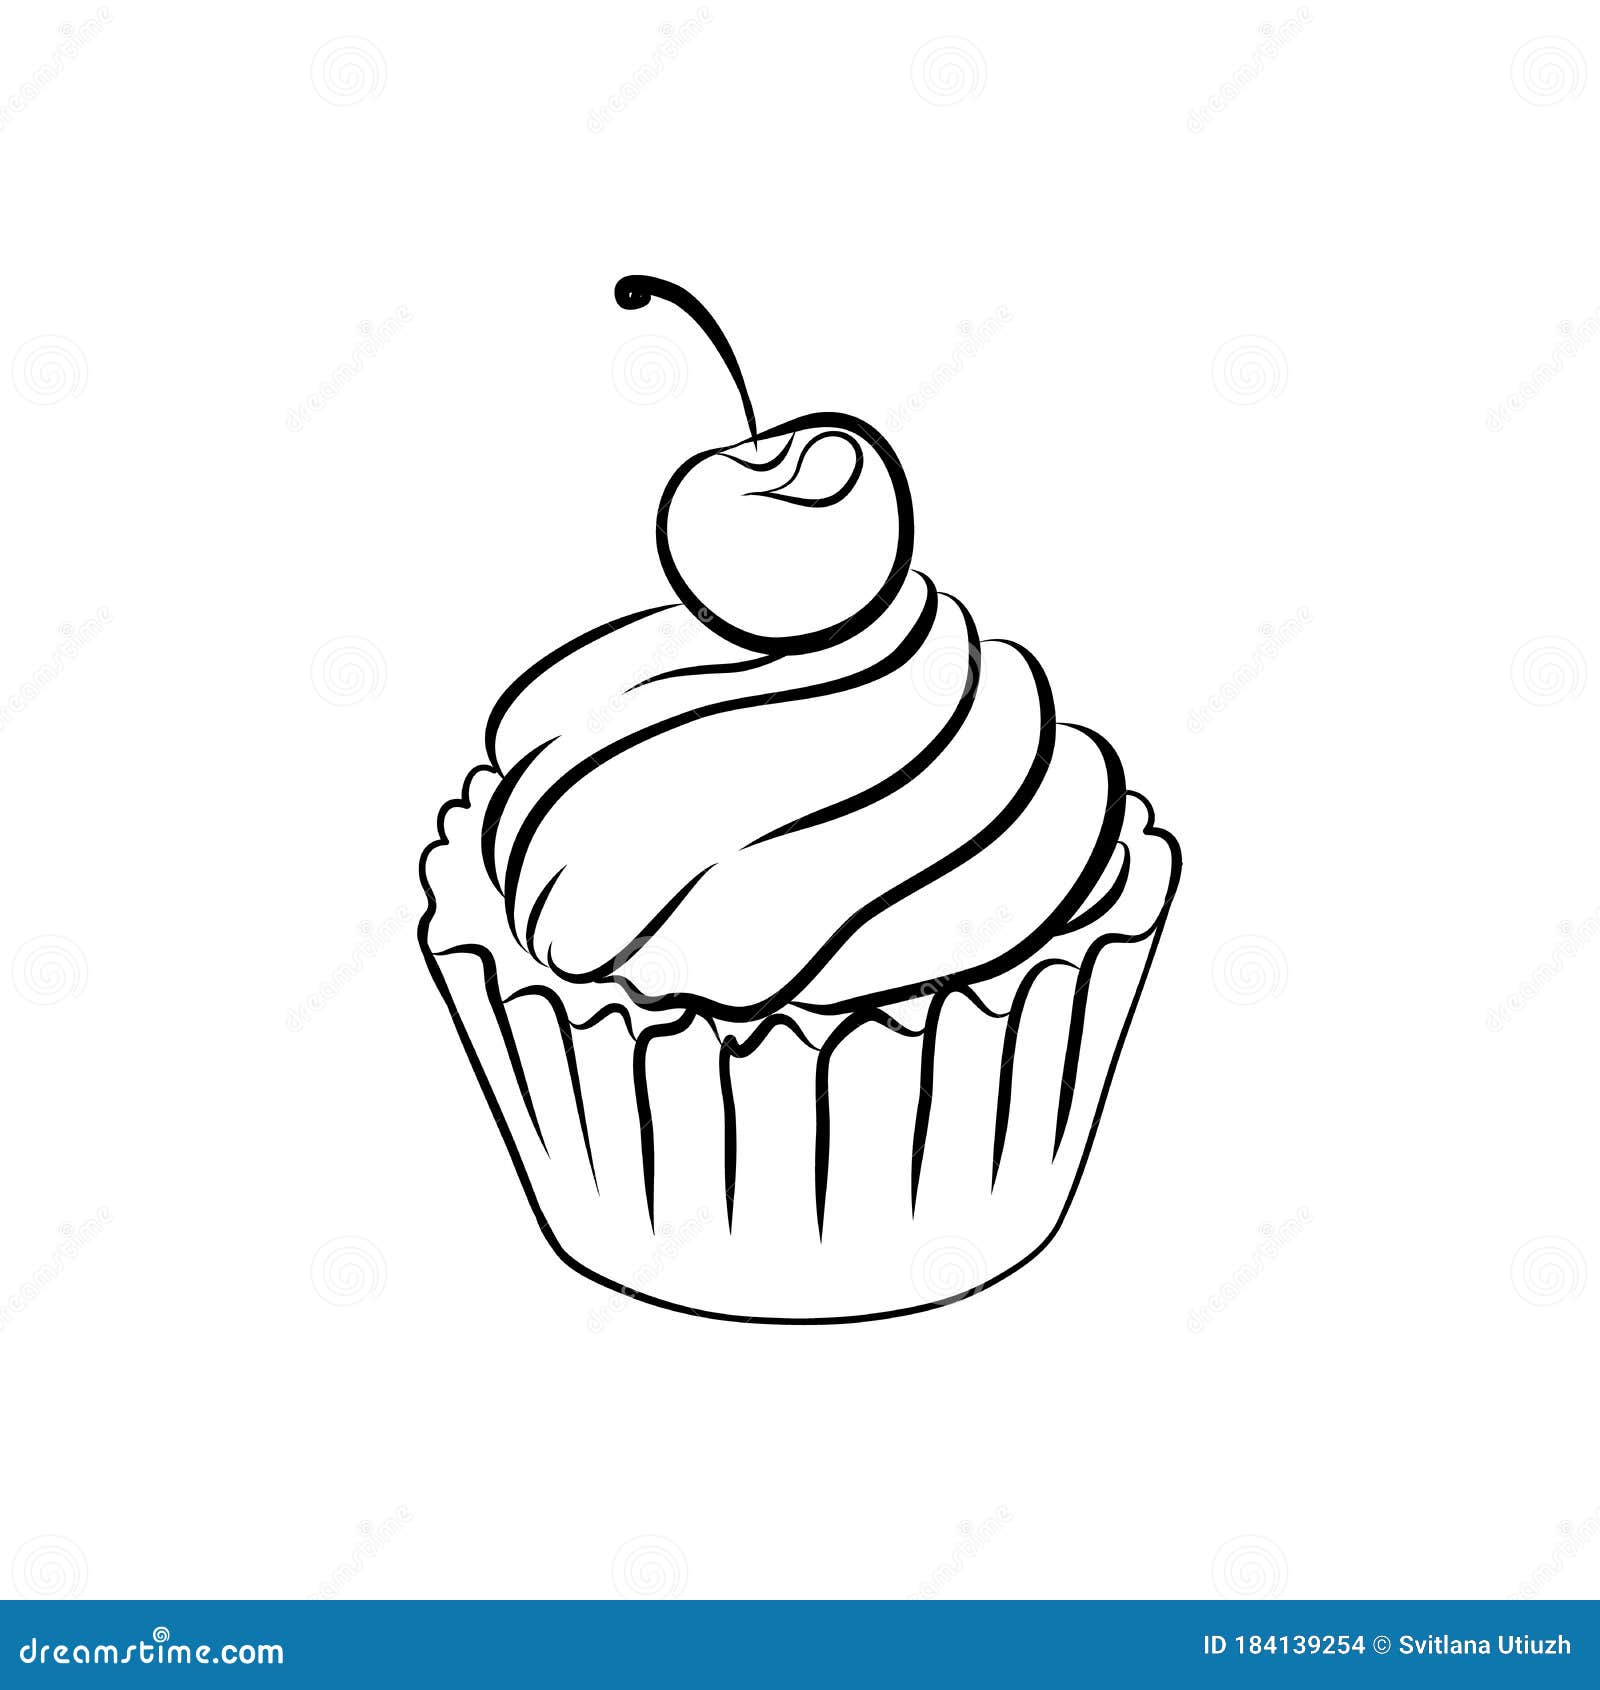 drawing cupcake sketch vector illustration isolated white background 184139254